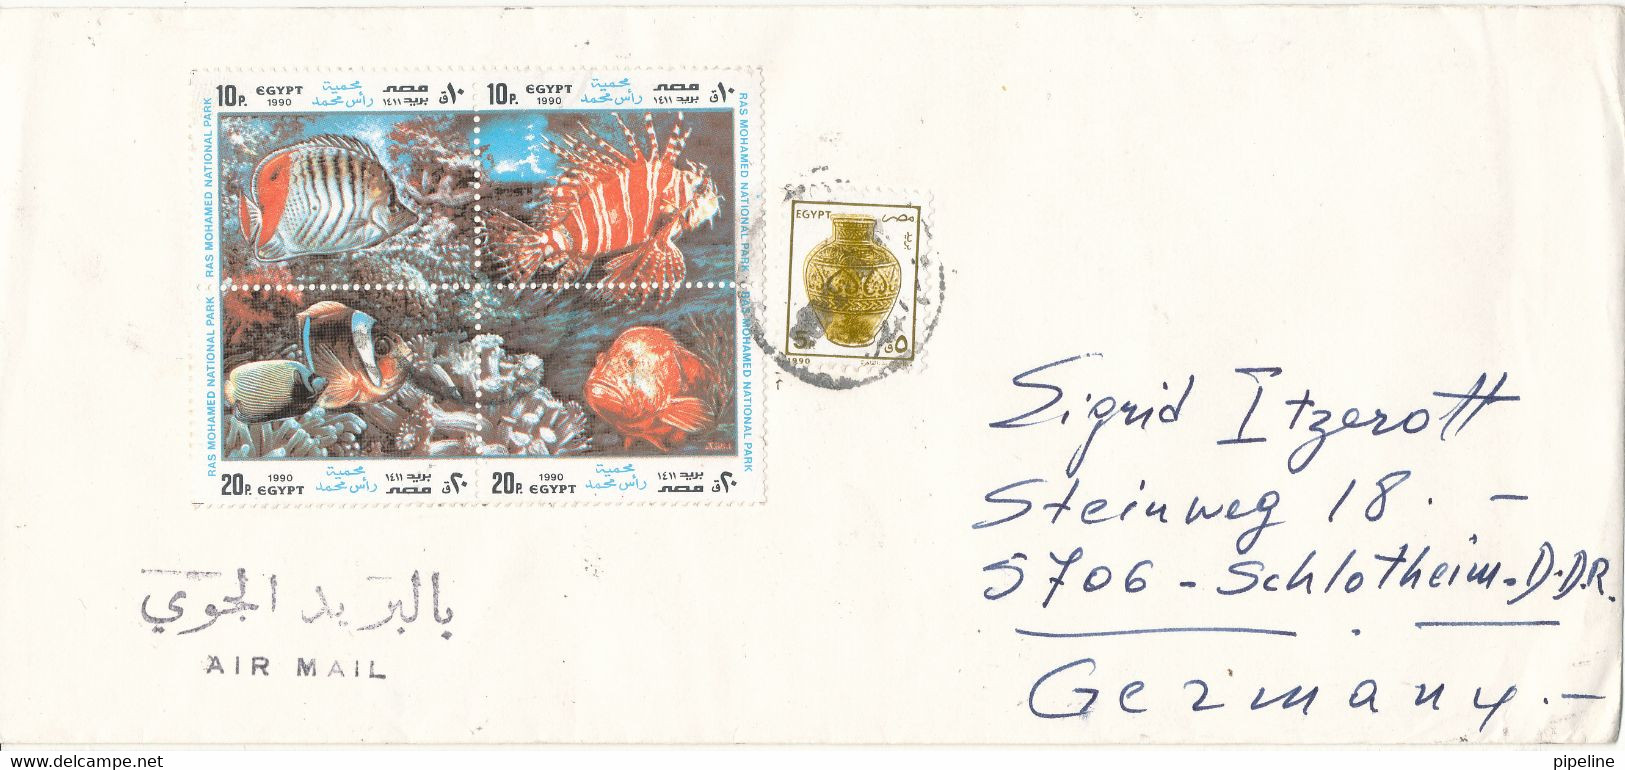 Egypt Cover Sent Air Mail To Germany Topic Stamps Ras Mohammed Natlonal Park Fish & Coral Reefs In A Block Of 4 - Covers & Documents